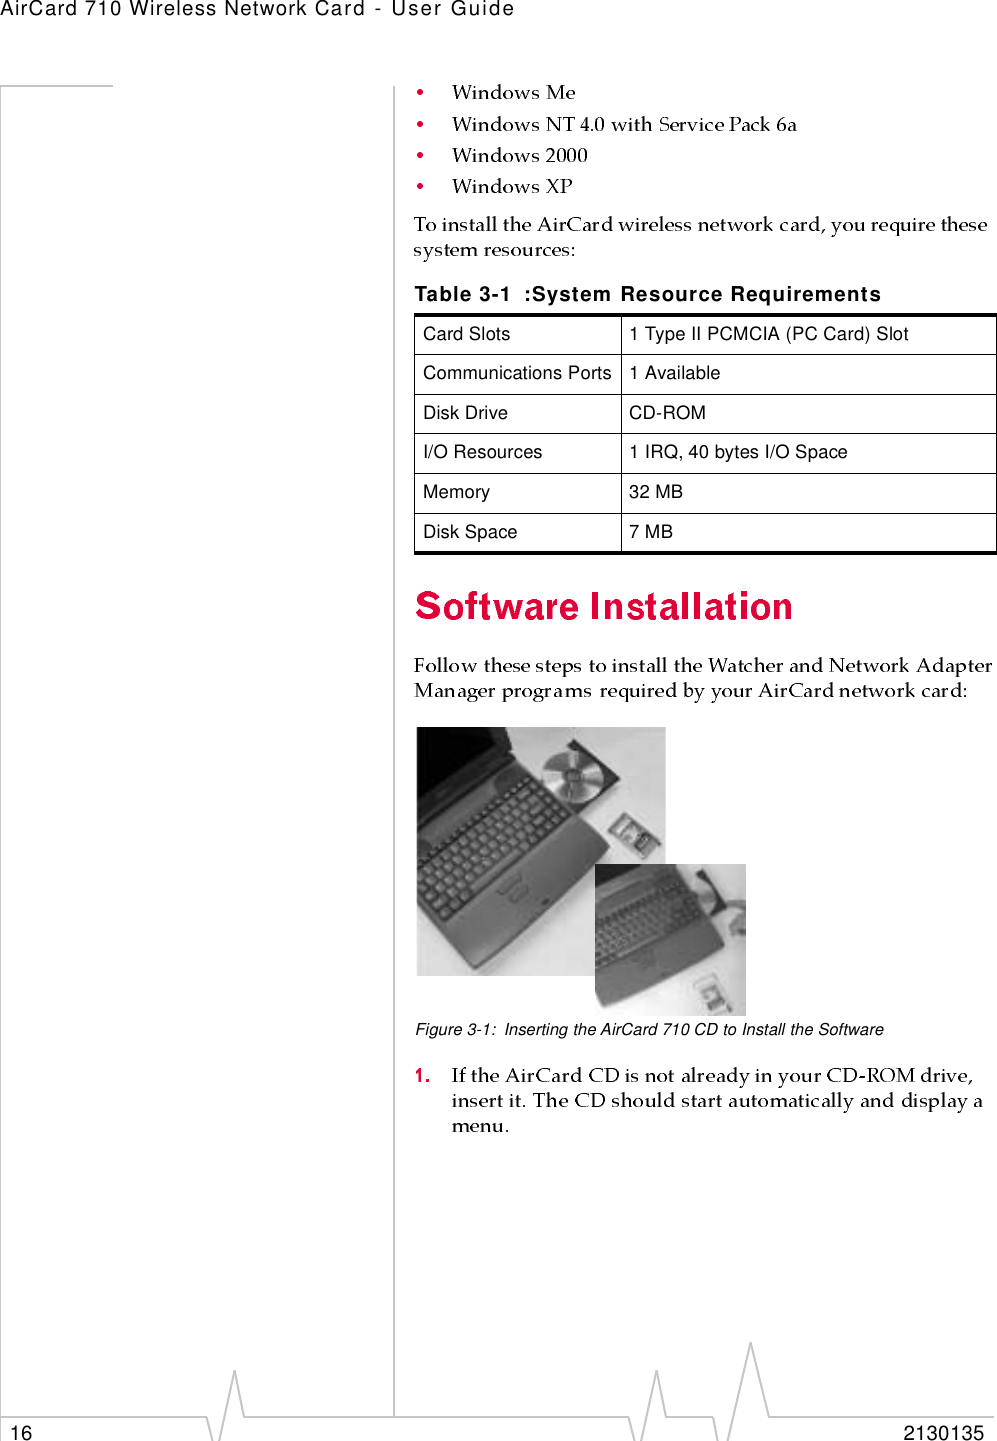 AirCard 710 Wireless Network Card - User Guide16 2130135Figure 3-1: Inserting the AirCard 710 CD to Install the SoftwareTable 3-1 :System Resource RequirementsCard Slots 1 Type II PCMCIA (PC Card) SlotCommunications Ports 1 AvailableDisk Drive CD-ROMI/O Resources 1 IRQ, 40 bytes I/O SpaceMemory 32 MBDisk Space 7 MB